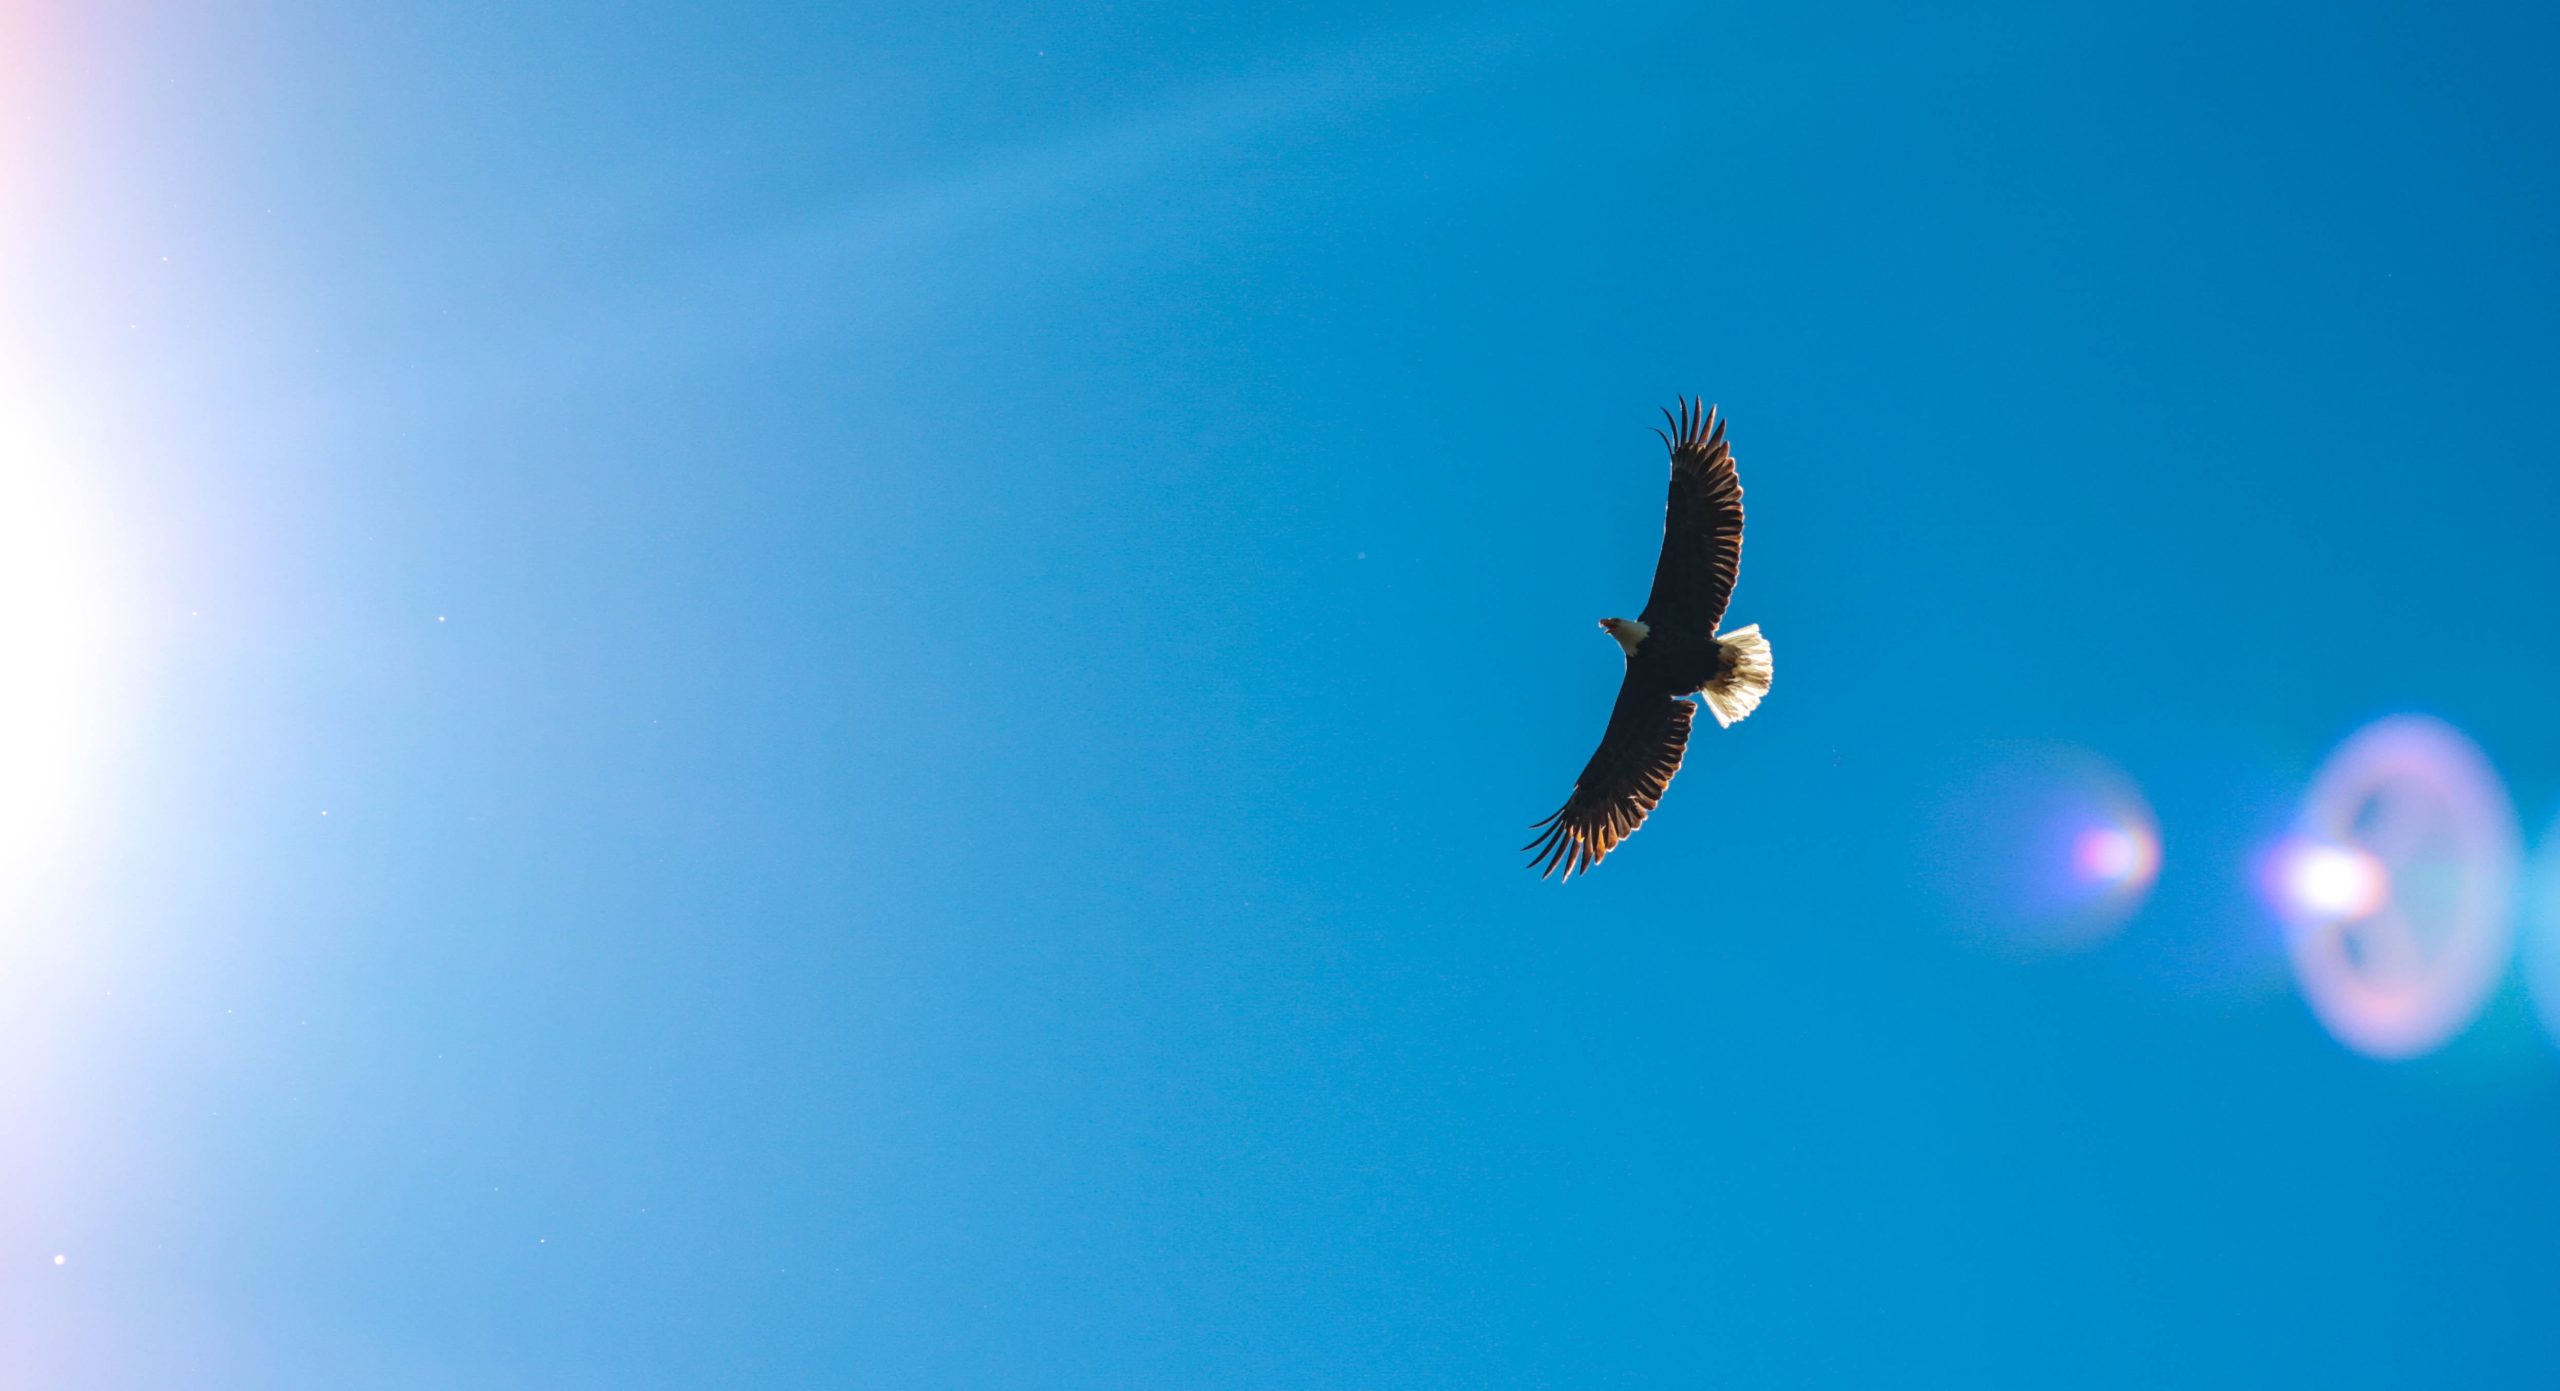 Eagle soaring against the backdrop of a blue sky.